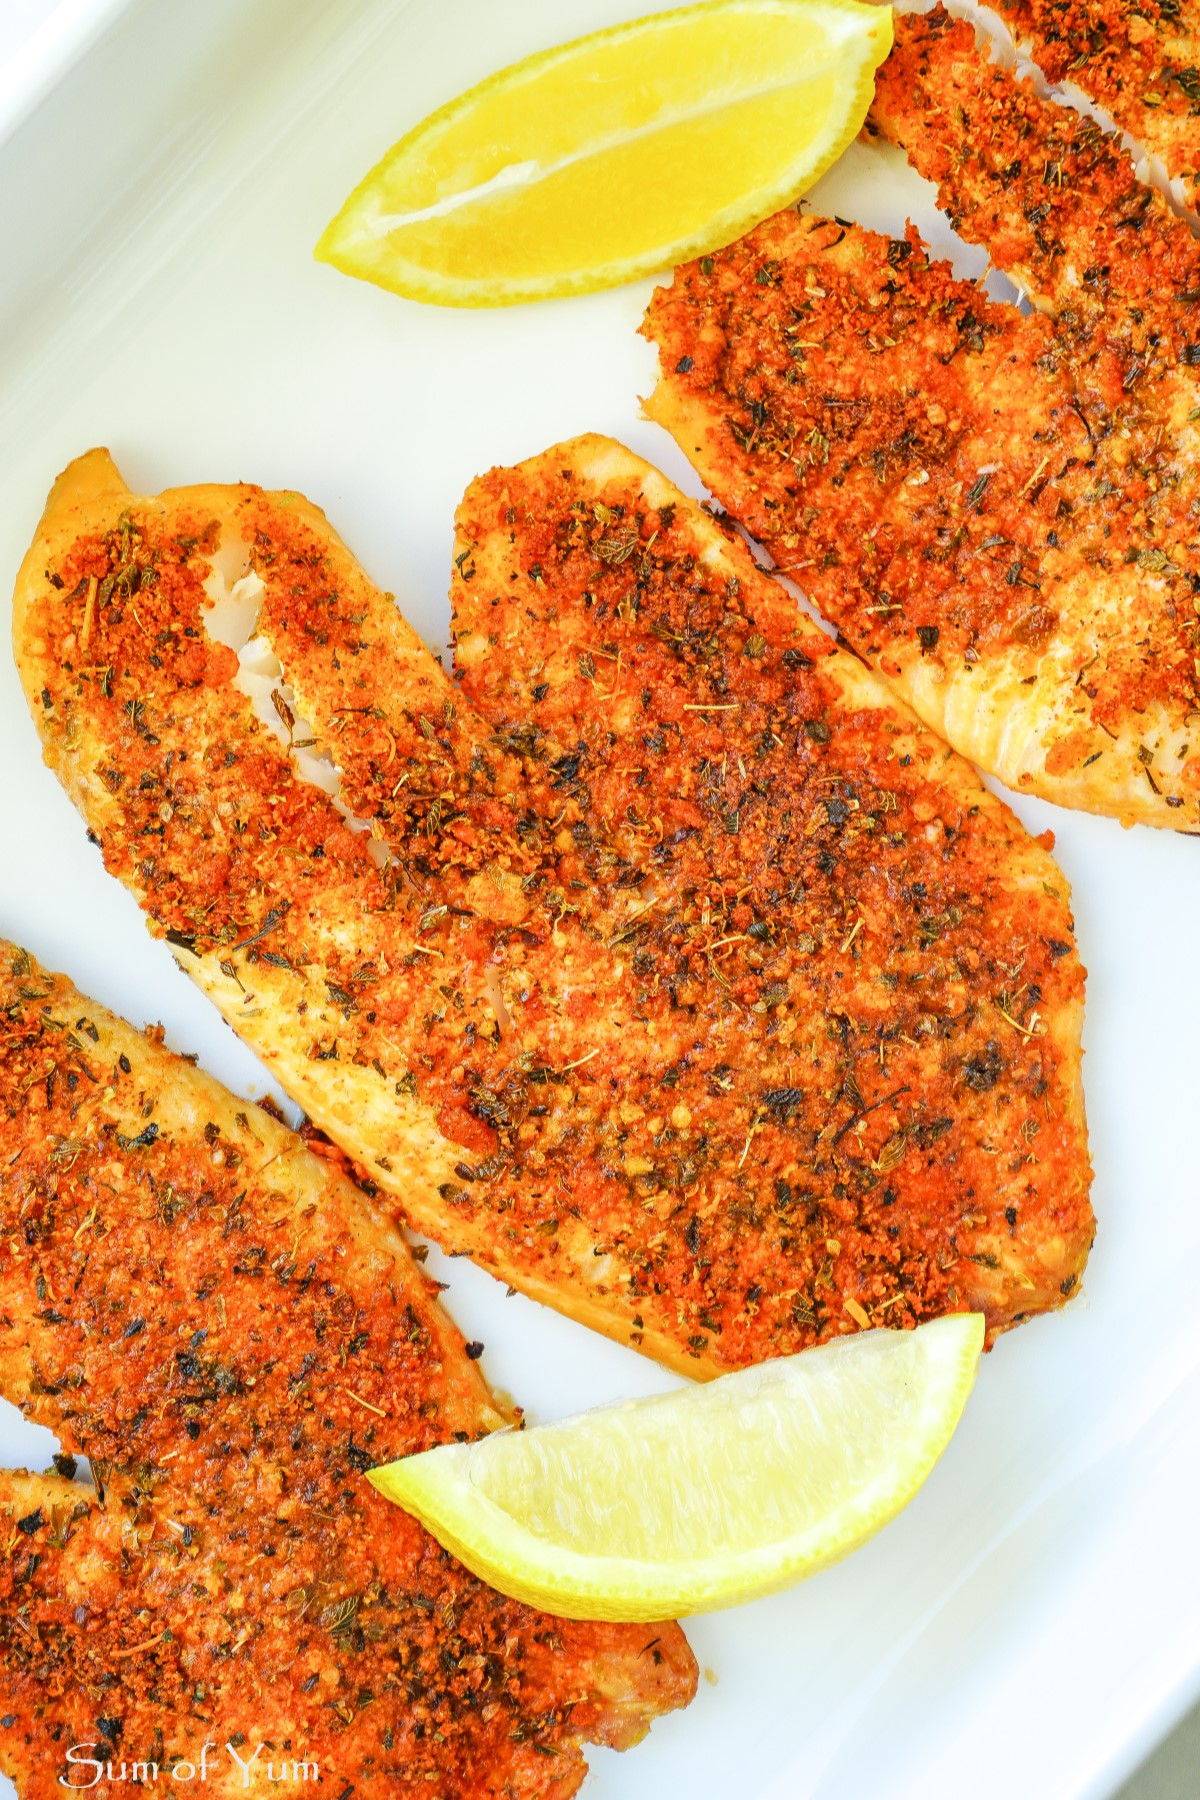 Baked Parmesan and Herb Crusted Tilapia